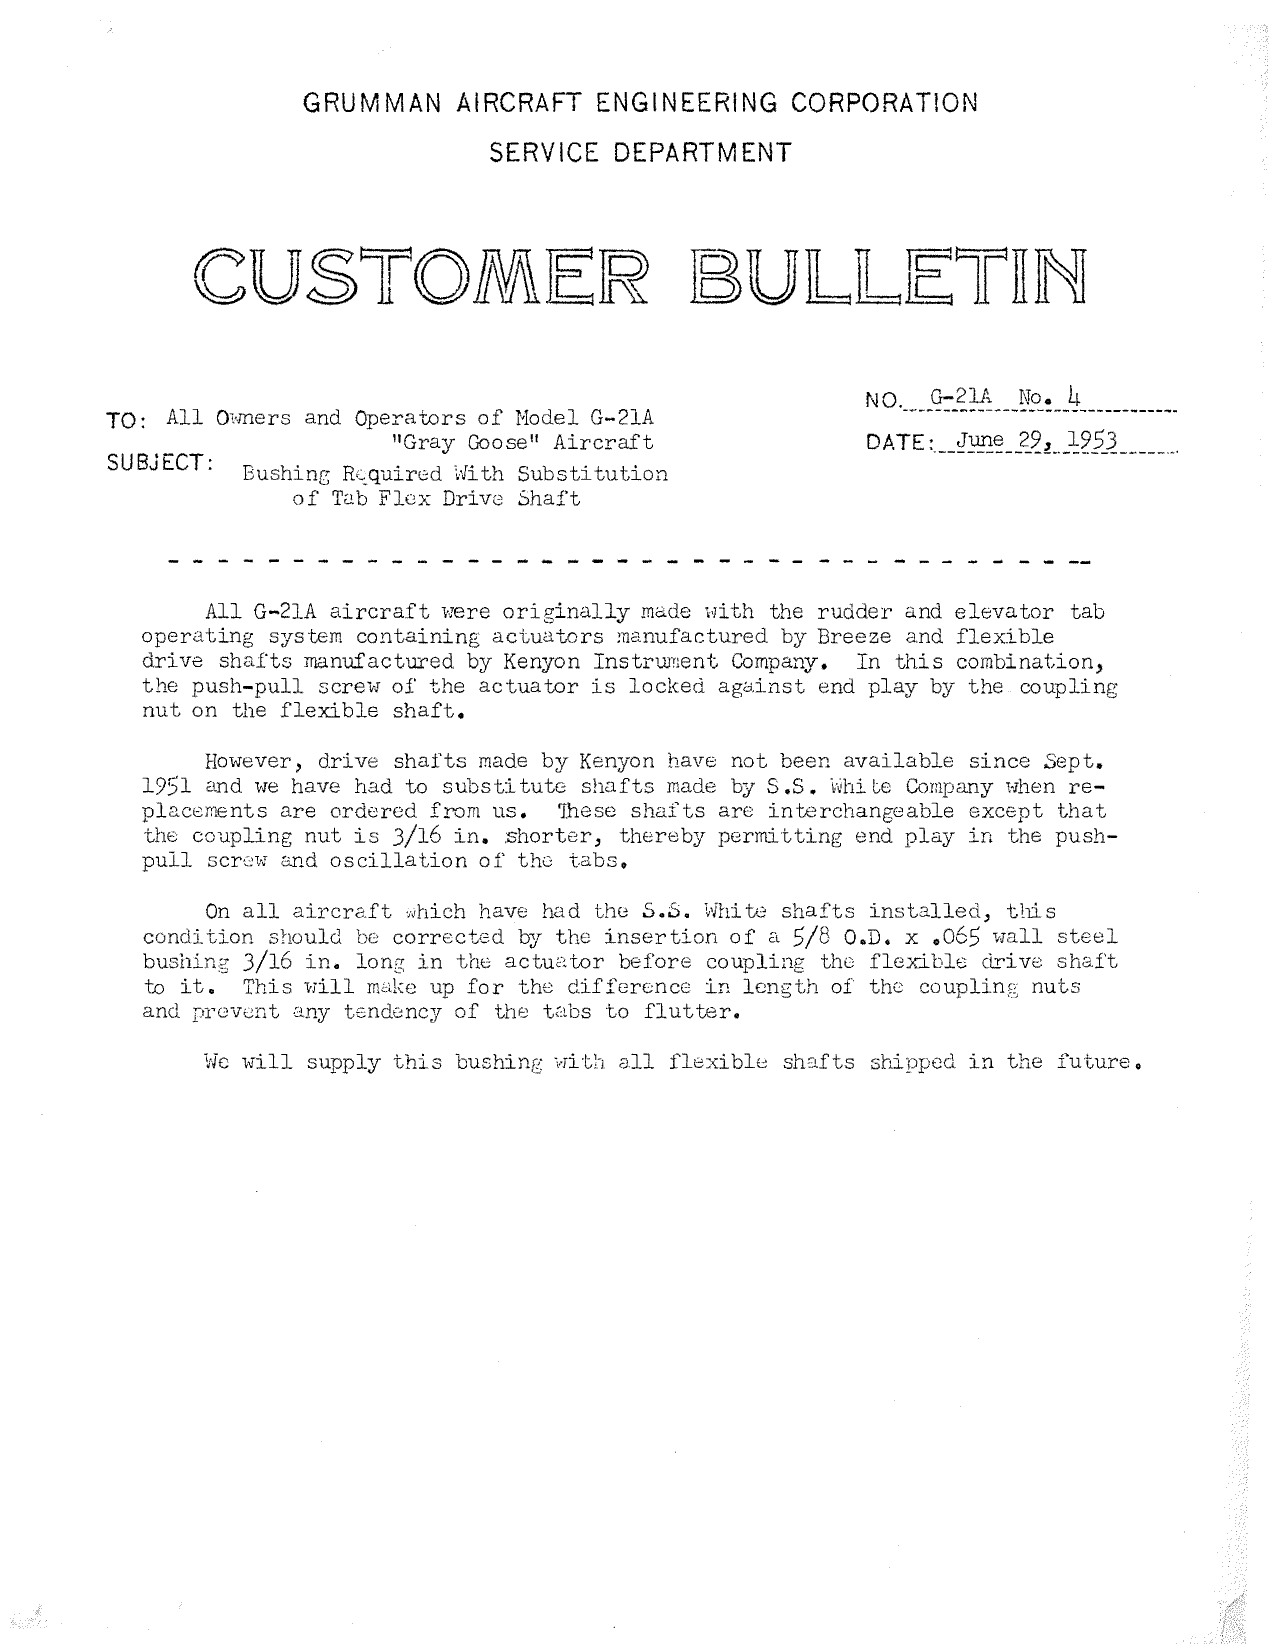 Sample page 1 from AirCorps Library document: Bushing Required with Substitution of Tab Flex Shaft for Model G-21A